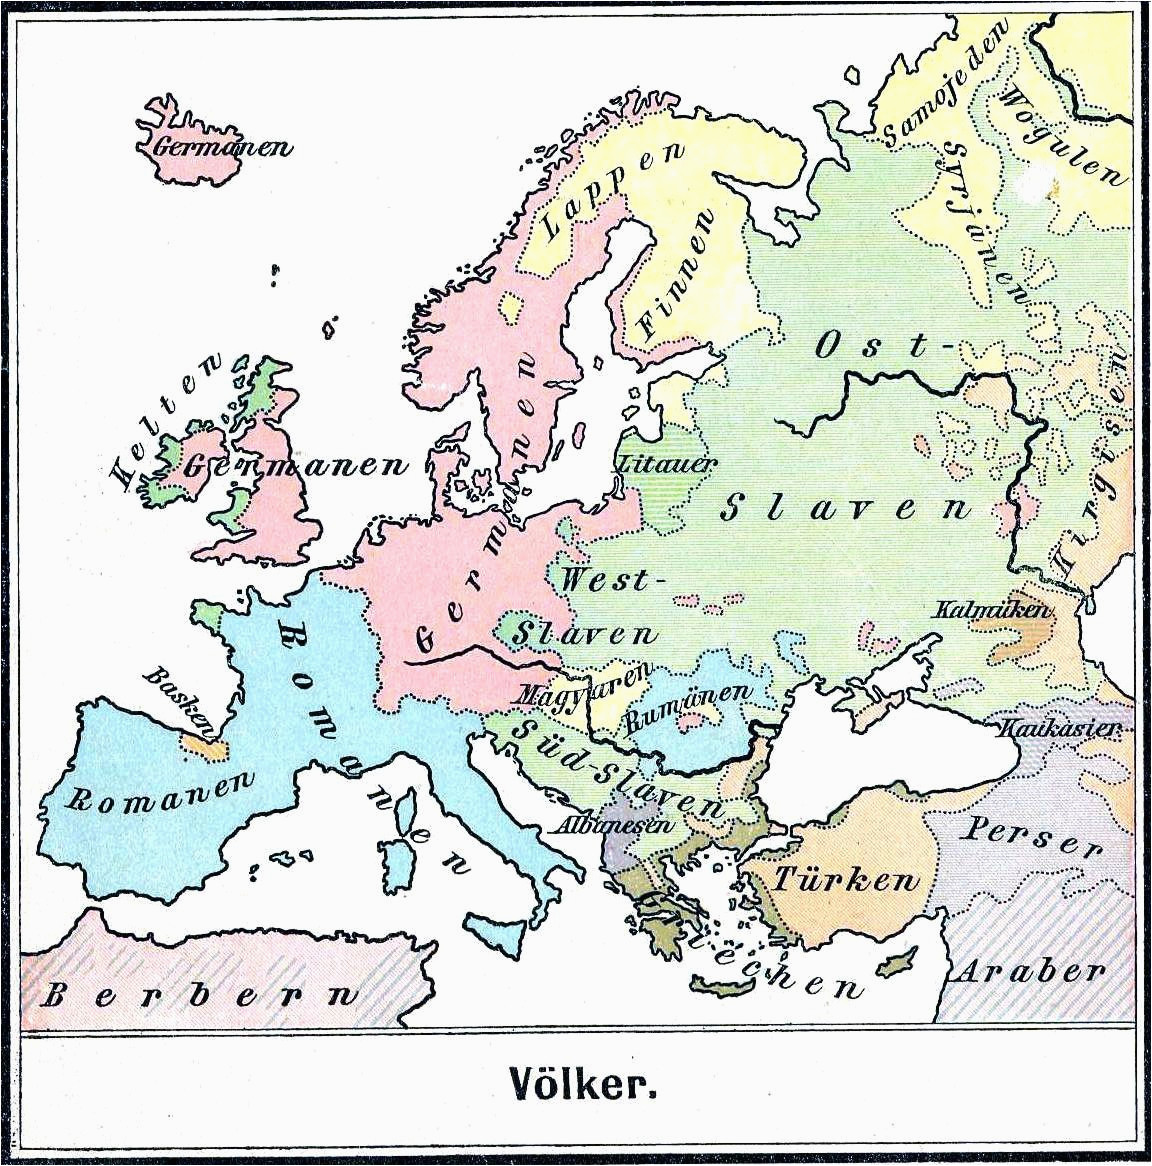 main ethnic groups in europe 1899 maps geography